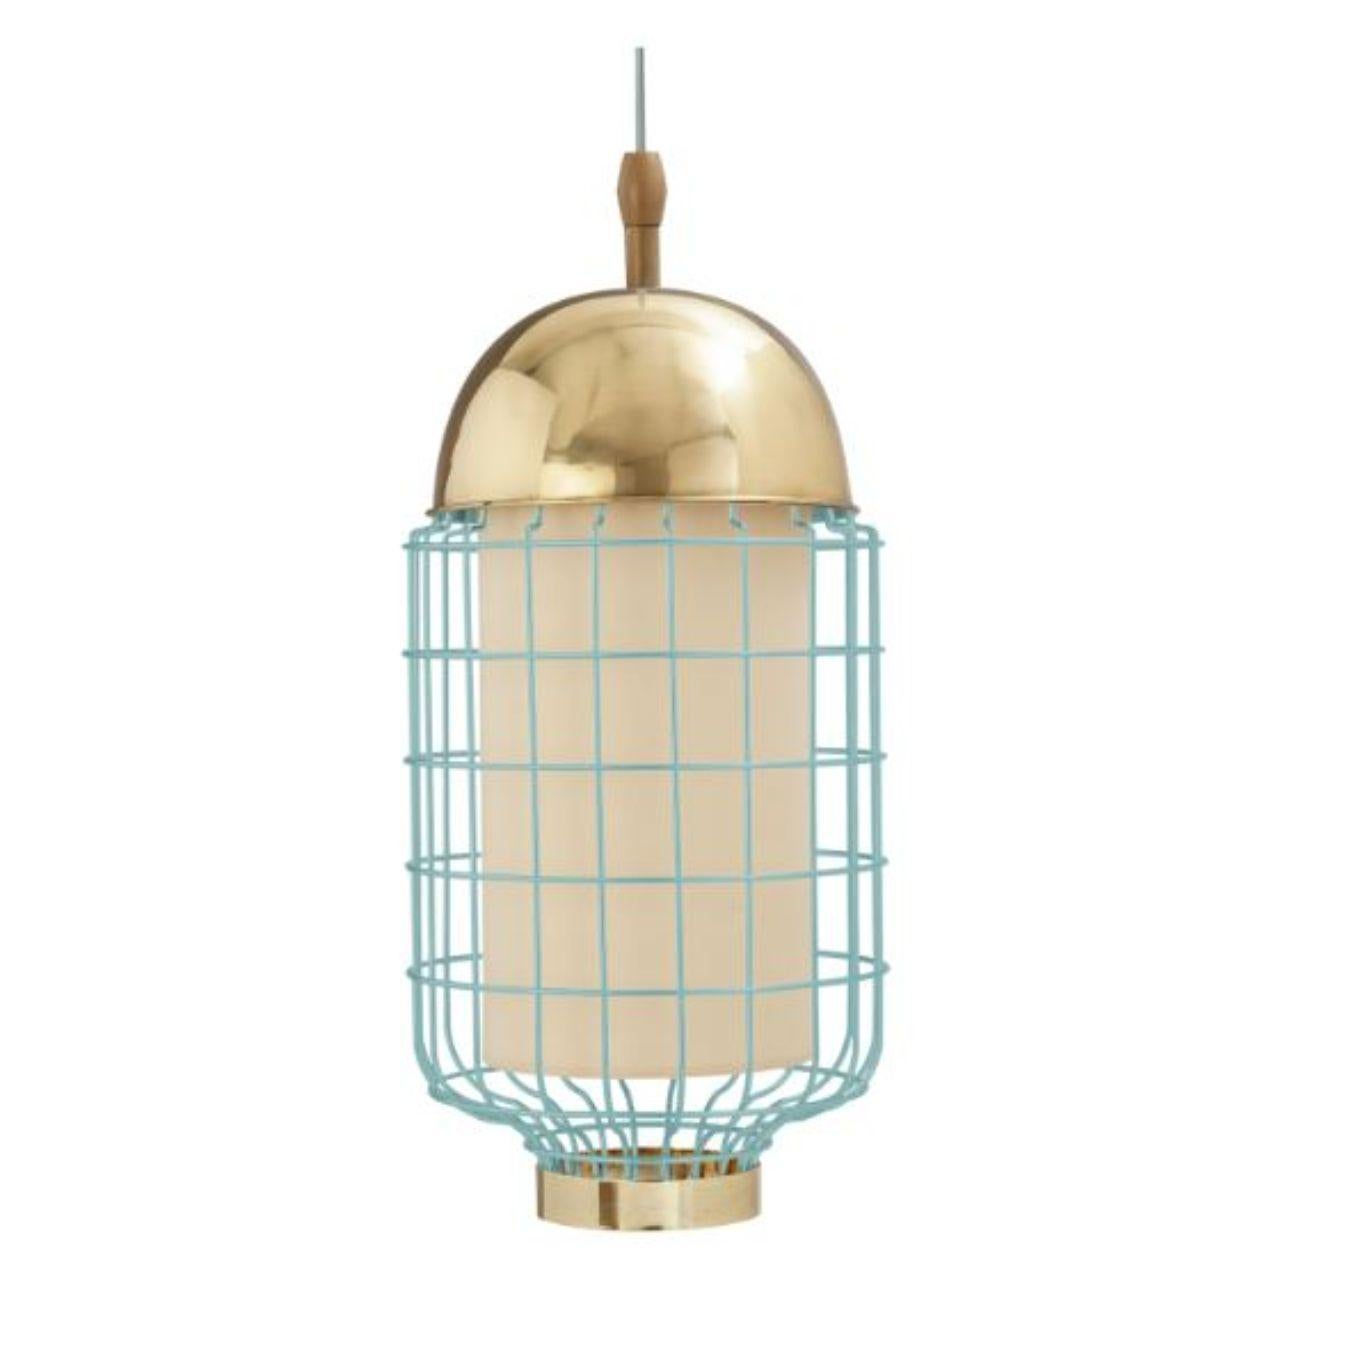 Brass jade magnolia II suspension lamp with brass ring by Dooq.
Dimensions: W 27 x D 27 x H 59 cm.
Materials: lacquered metal, polished or brushed metal, brass.
abat-jour: cotton
Also available in different colours and